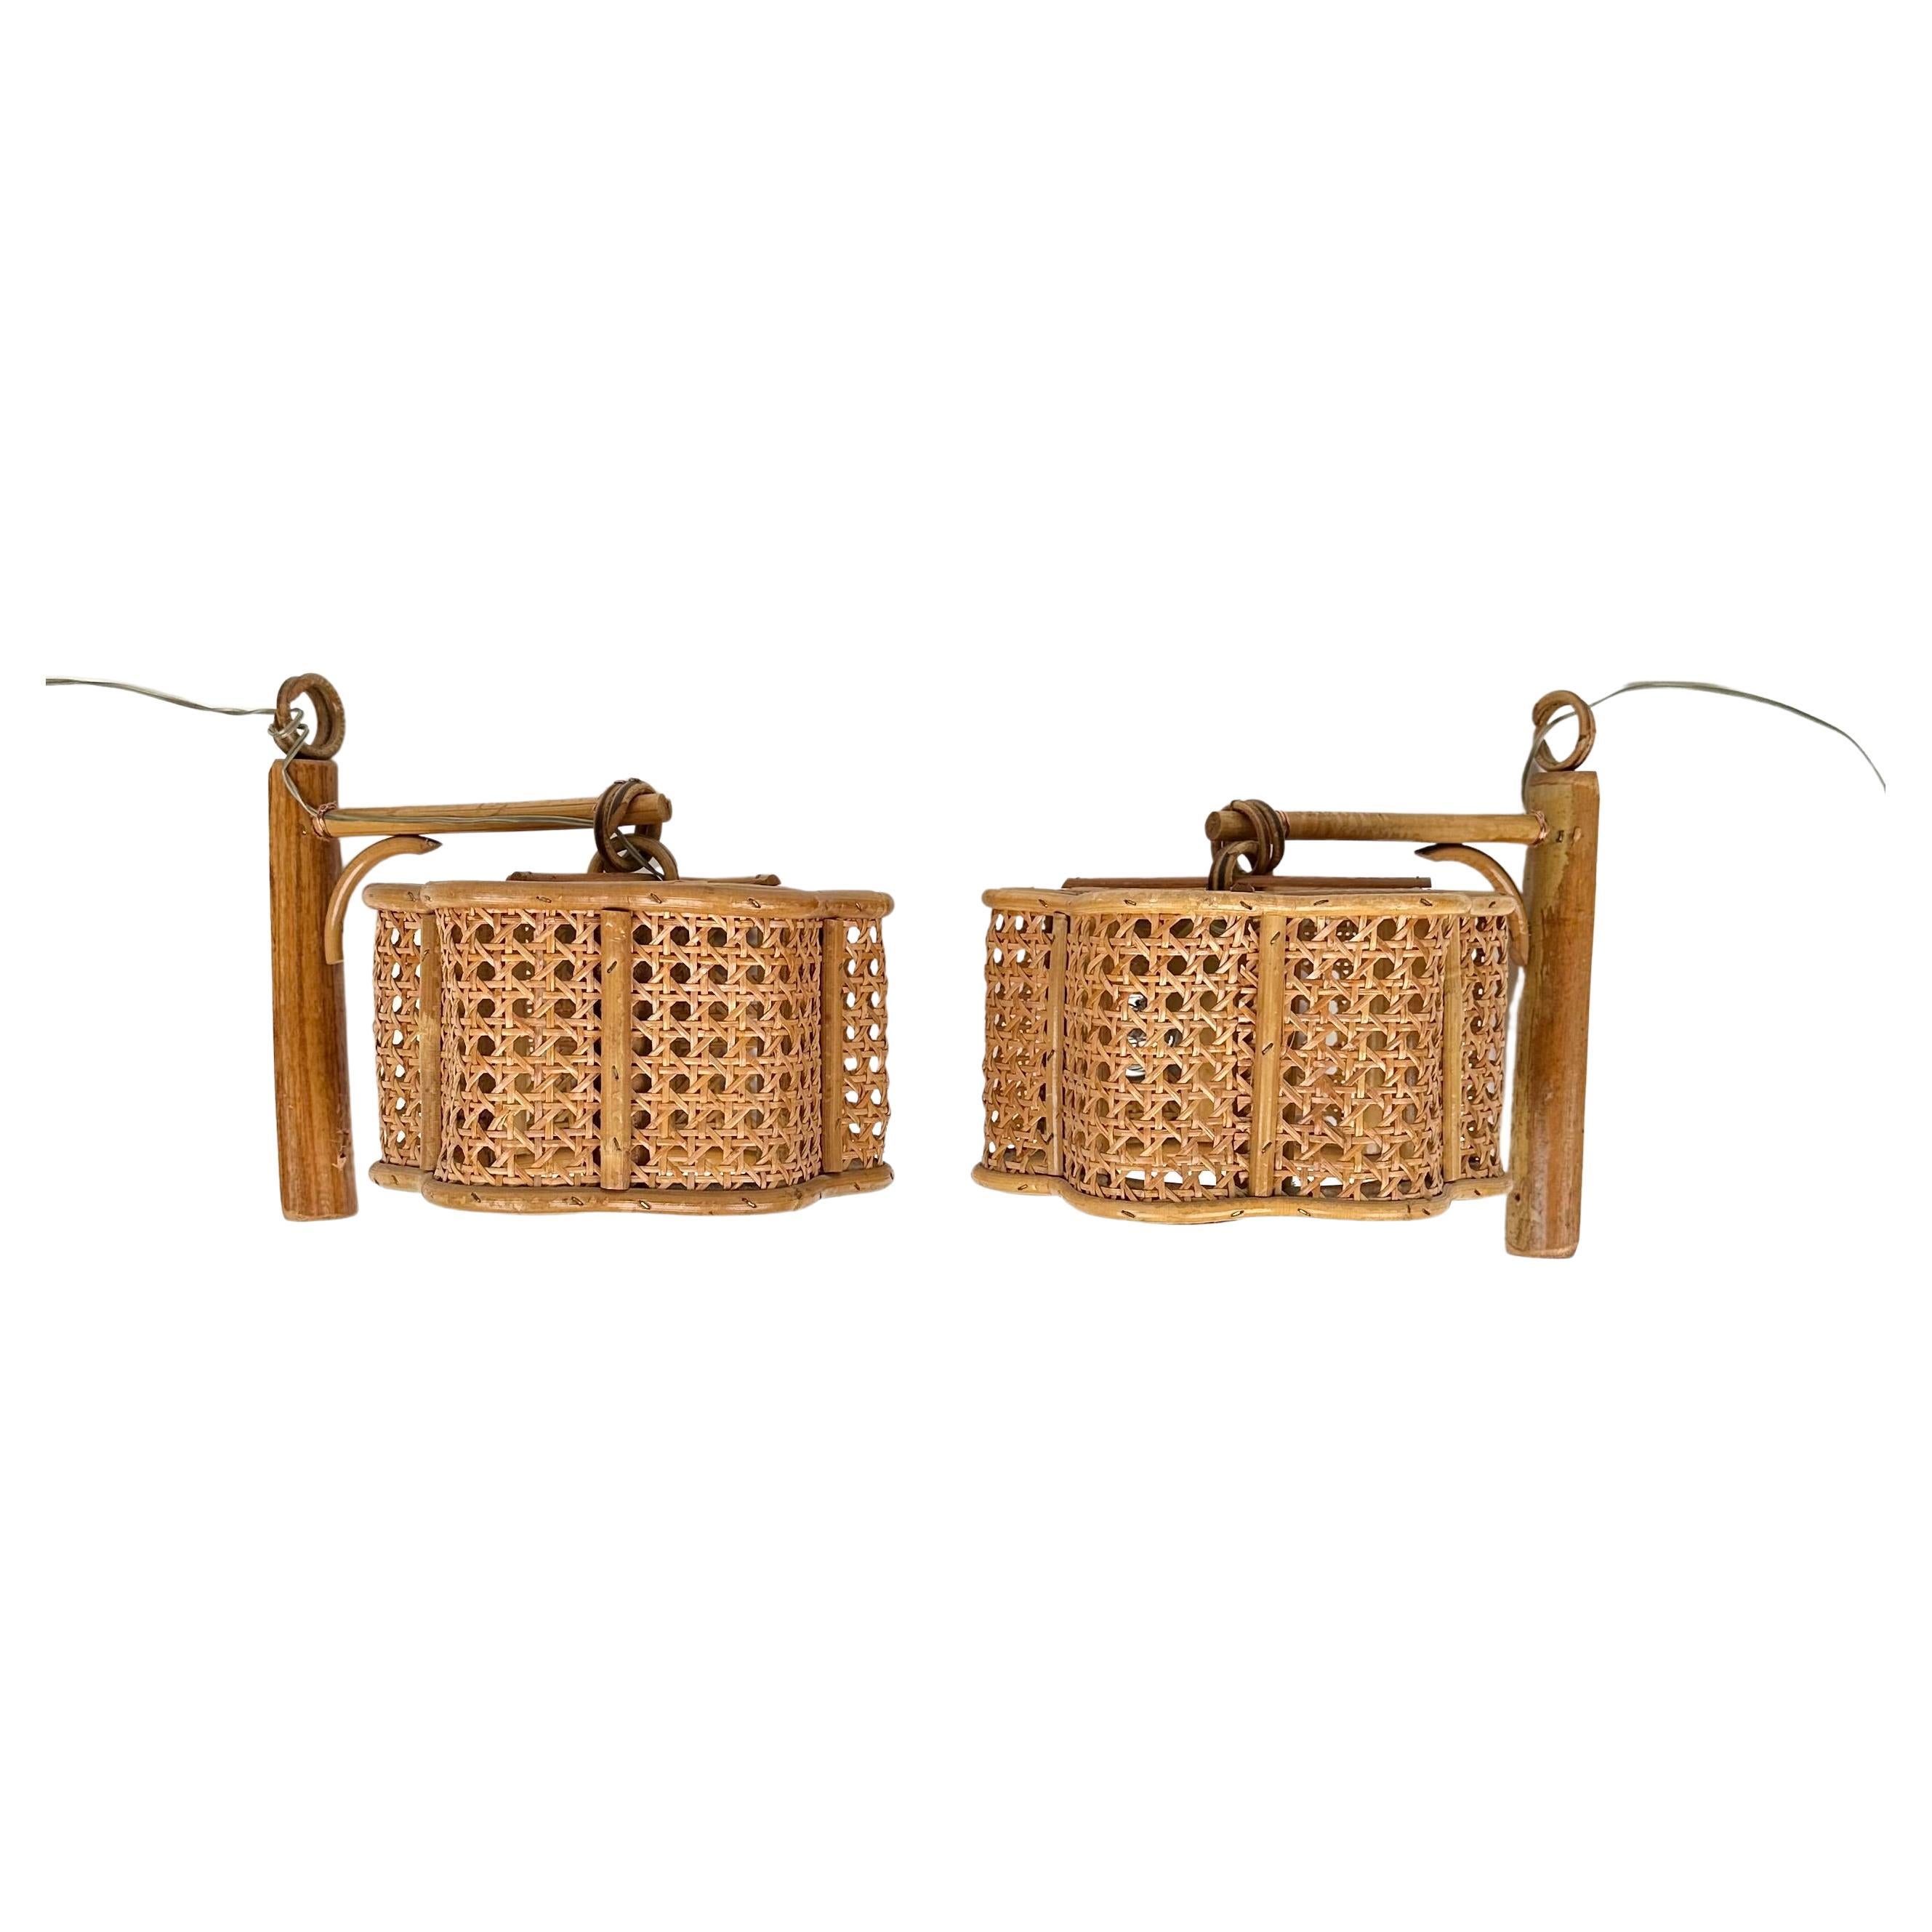 Pair of Sconces "Lantern" in Bamboo and Rattan Louis Sognot Style, Italy, 1960s